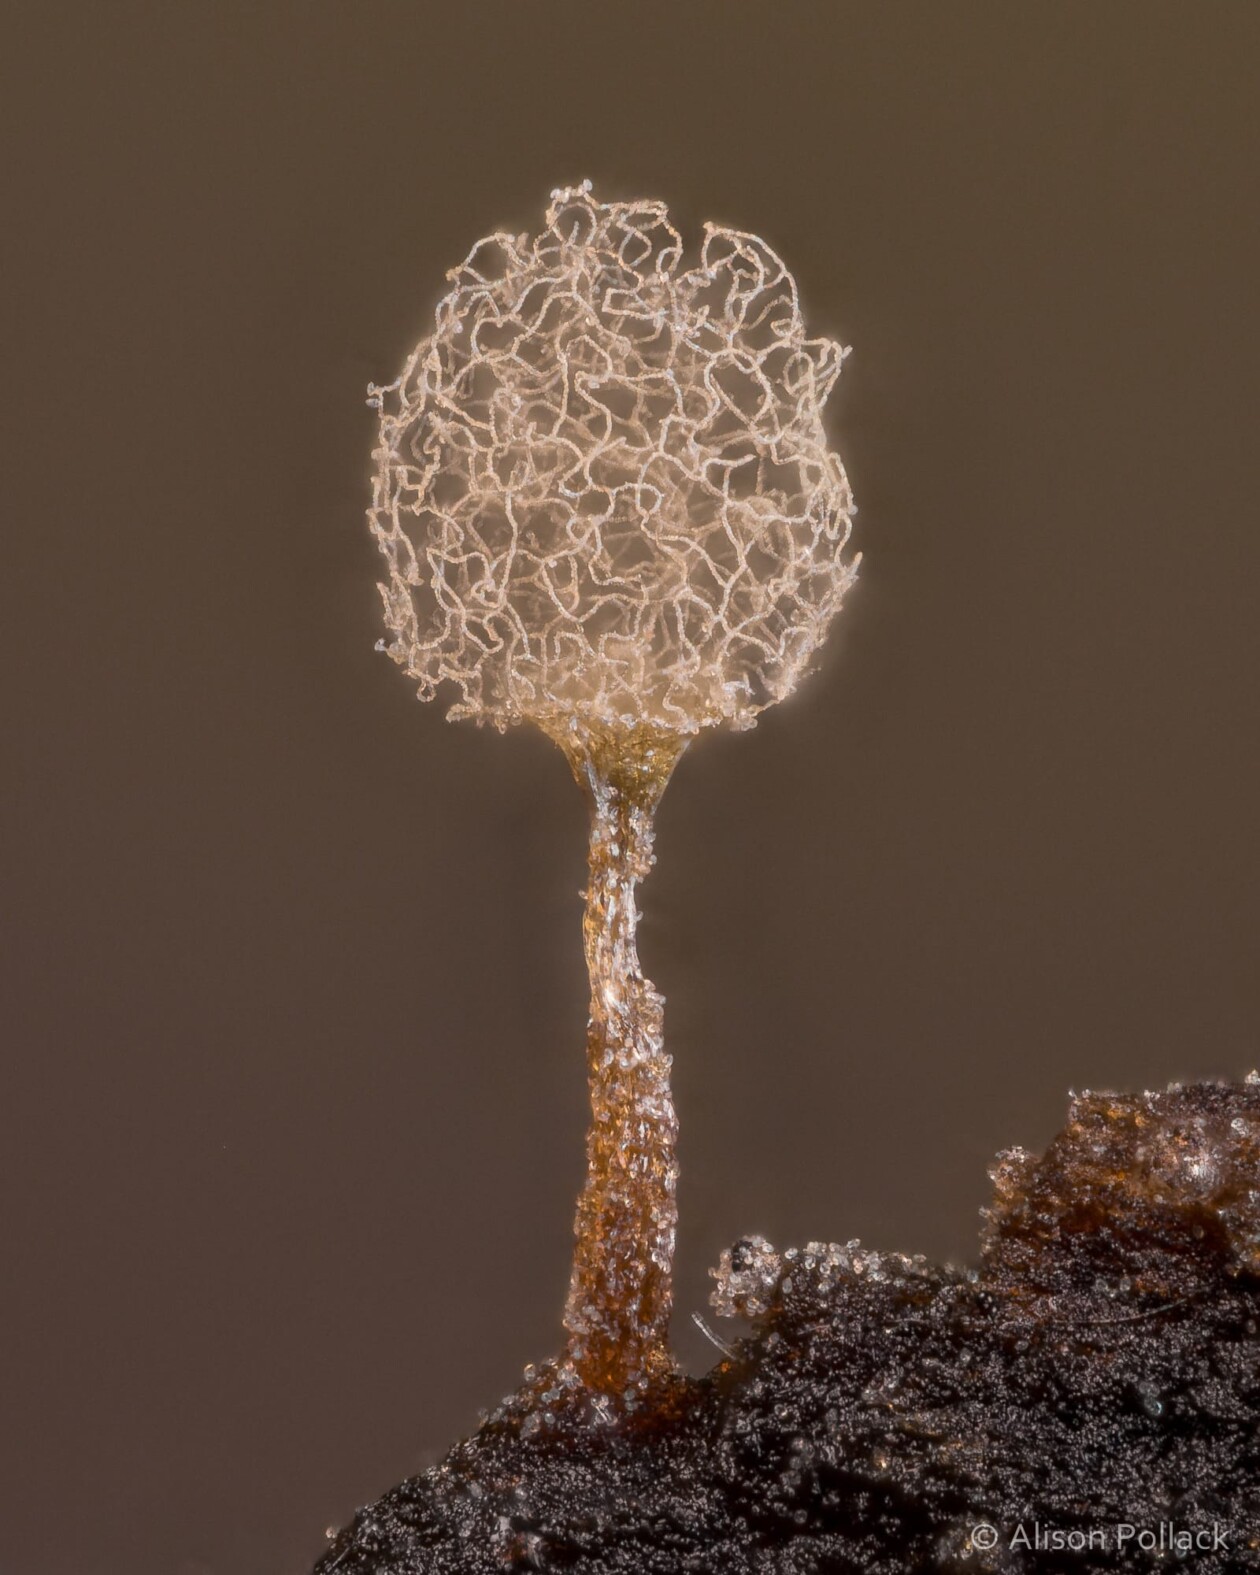 The Microscopic Majesty Of Mushrooms And Molds Captured By Alison Pollack (16)